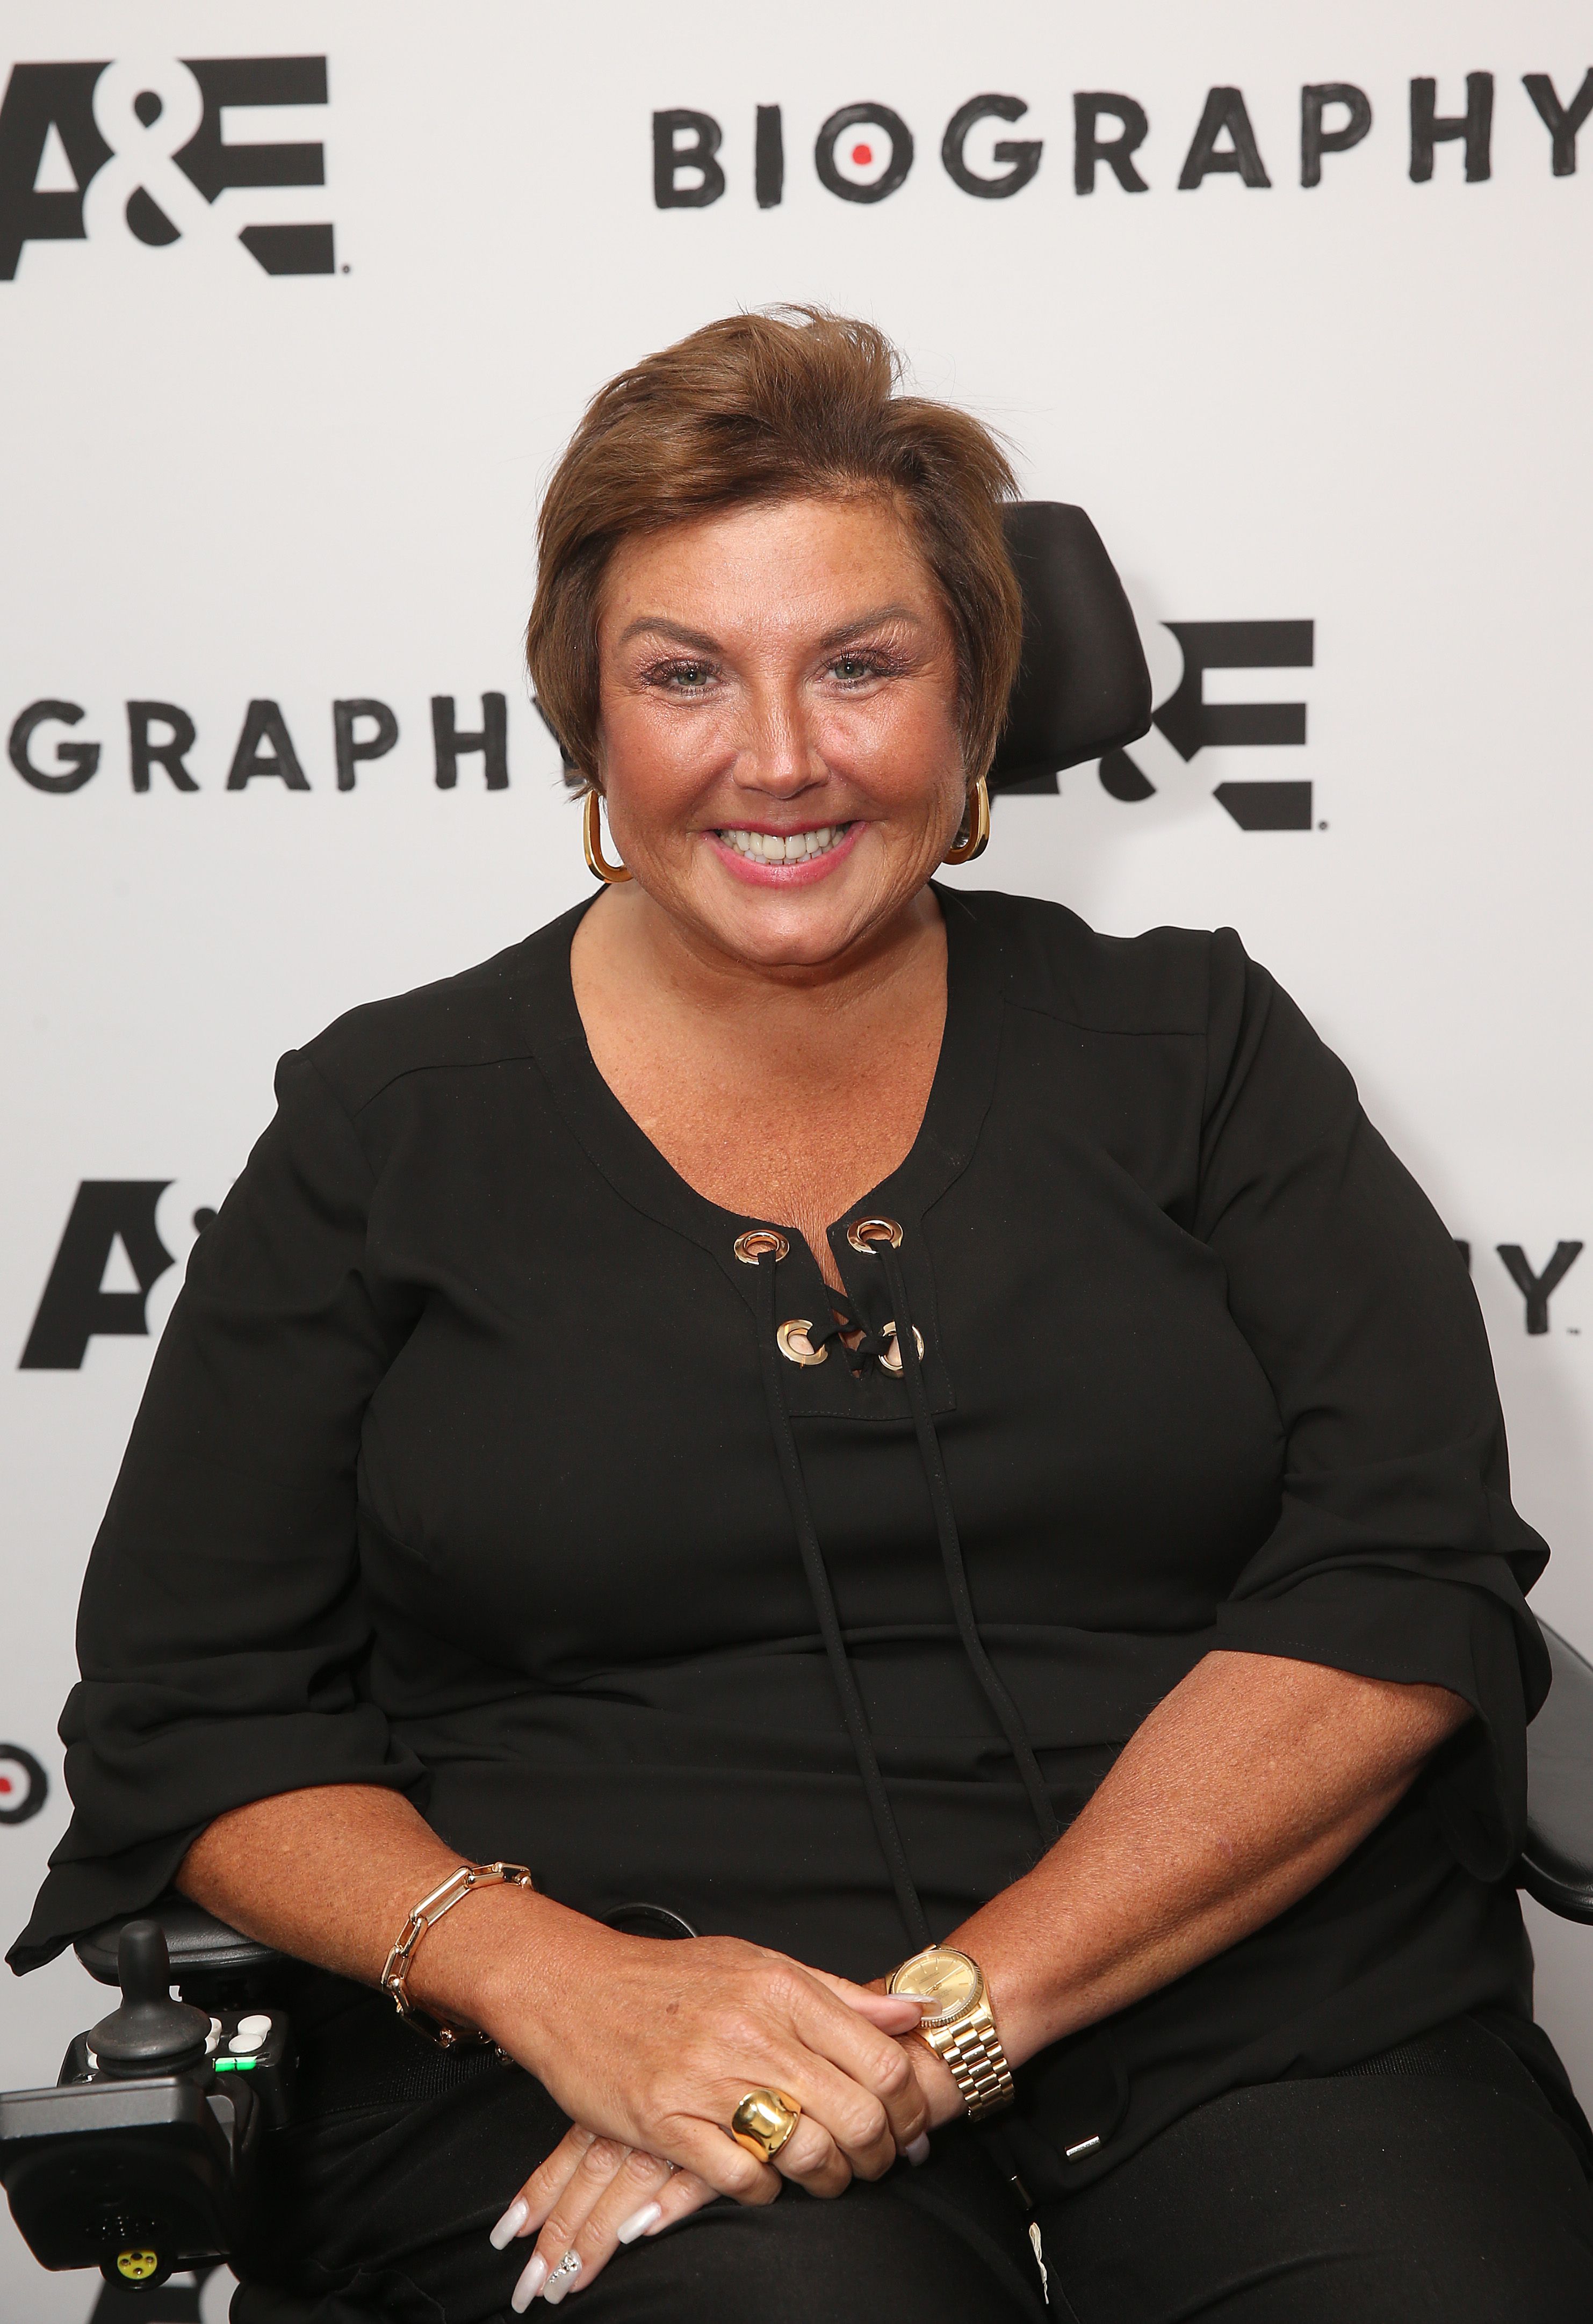 Abby Lee Miller Opens Up About Jail Time, Cancer 'Changing' Her